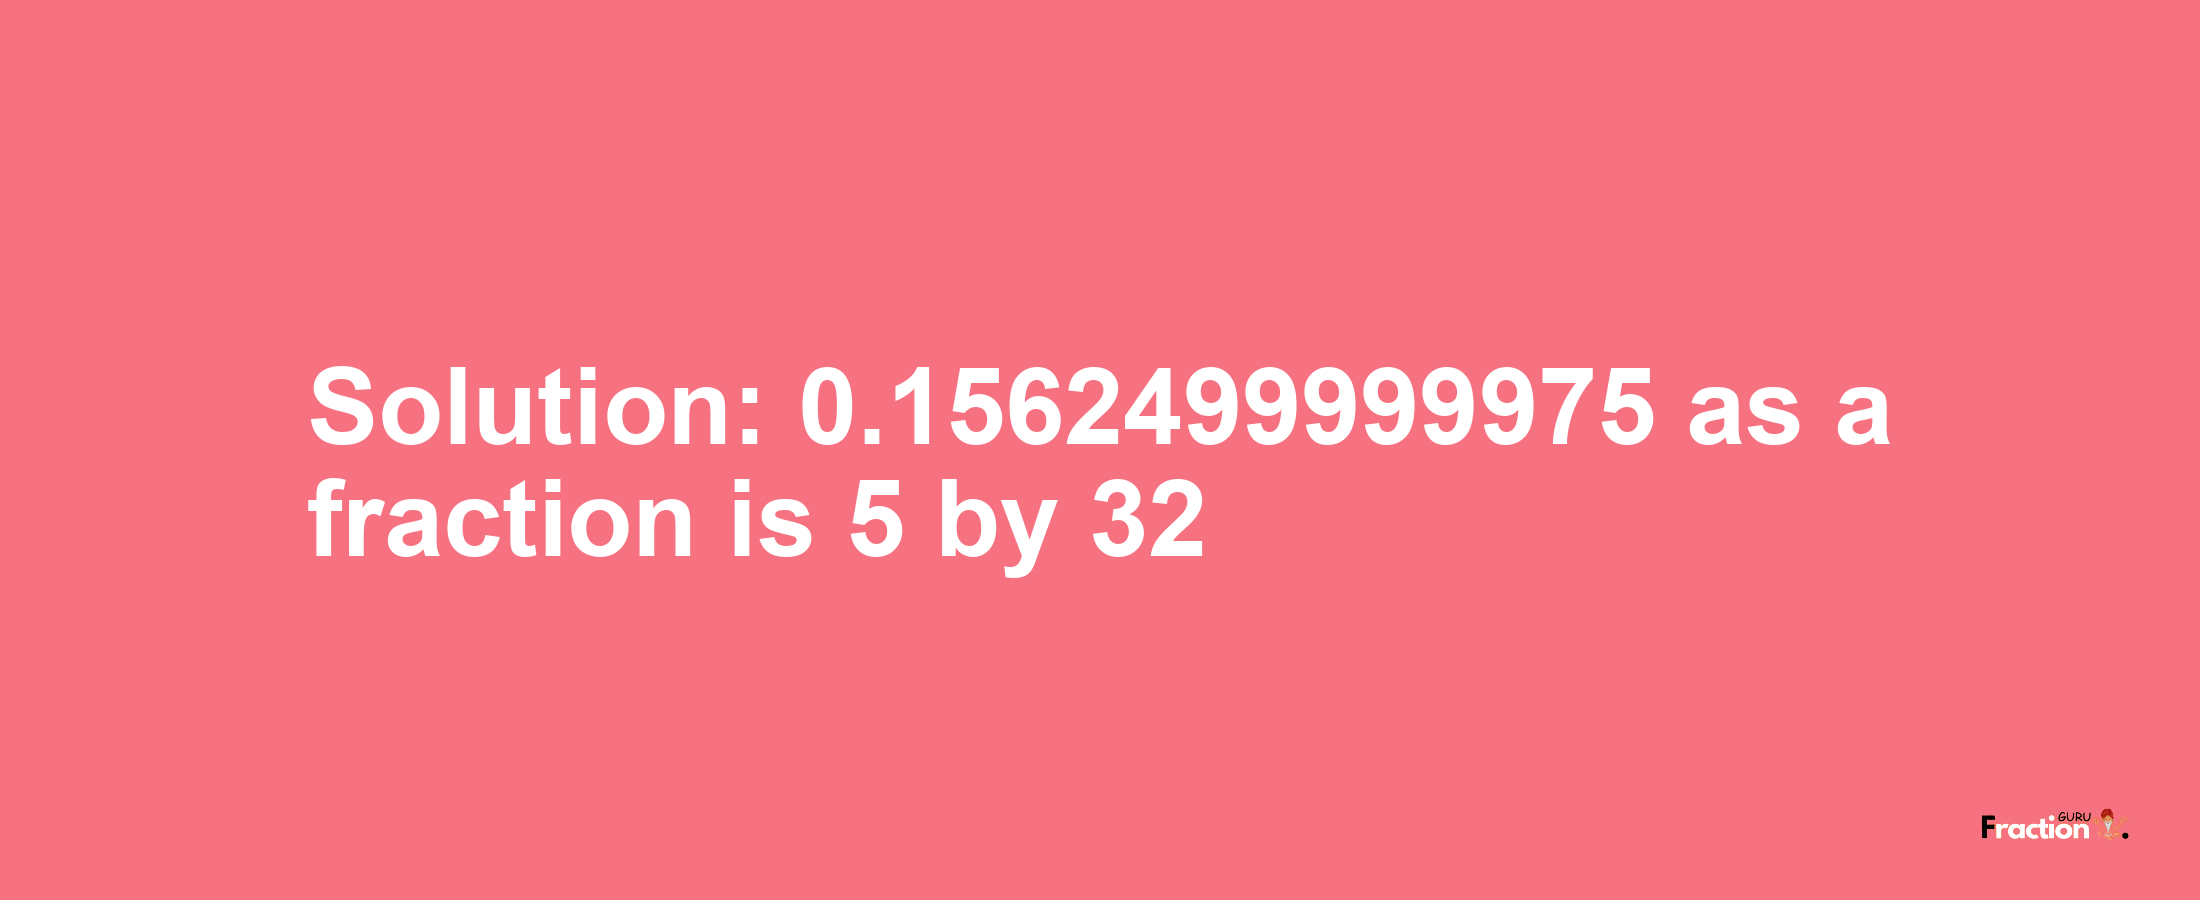 Solution:0.1562499999975 as a fraction is 5/32